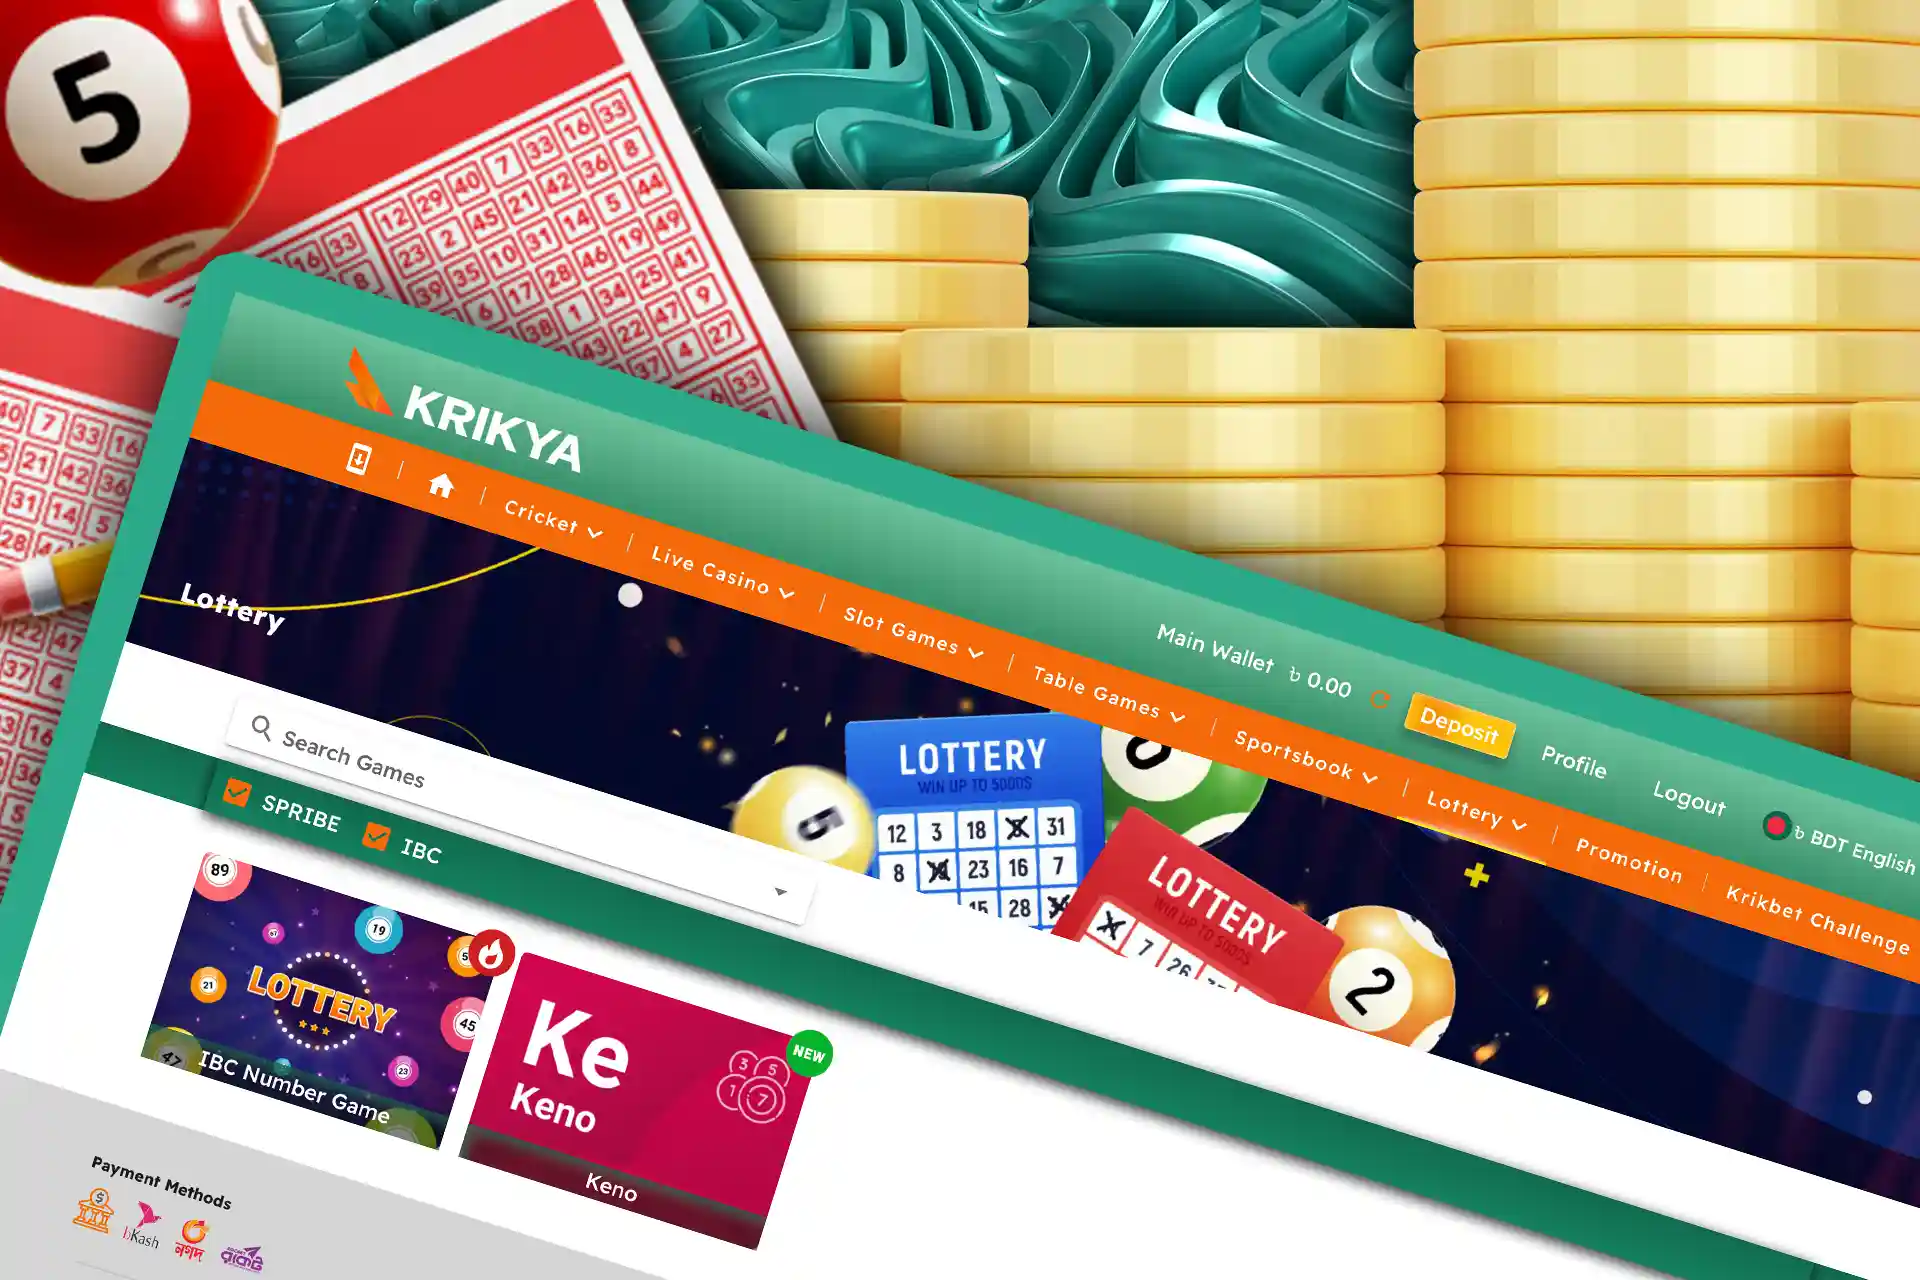 Test your luck and play lottery games at Krikya.